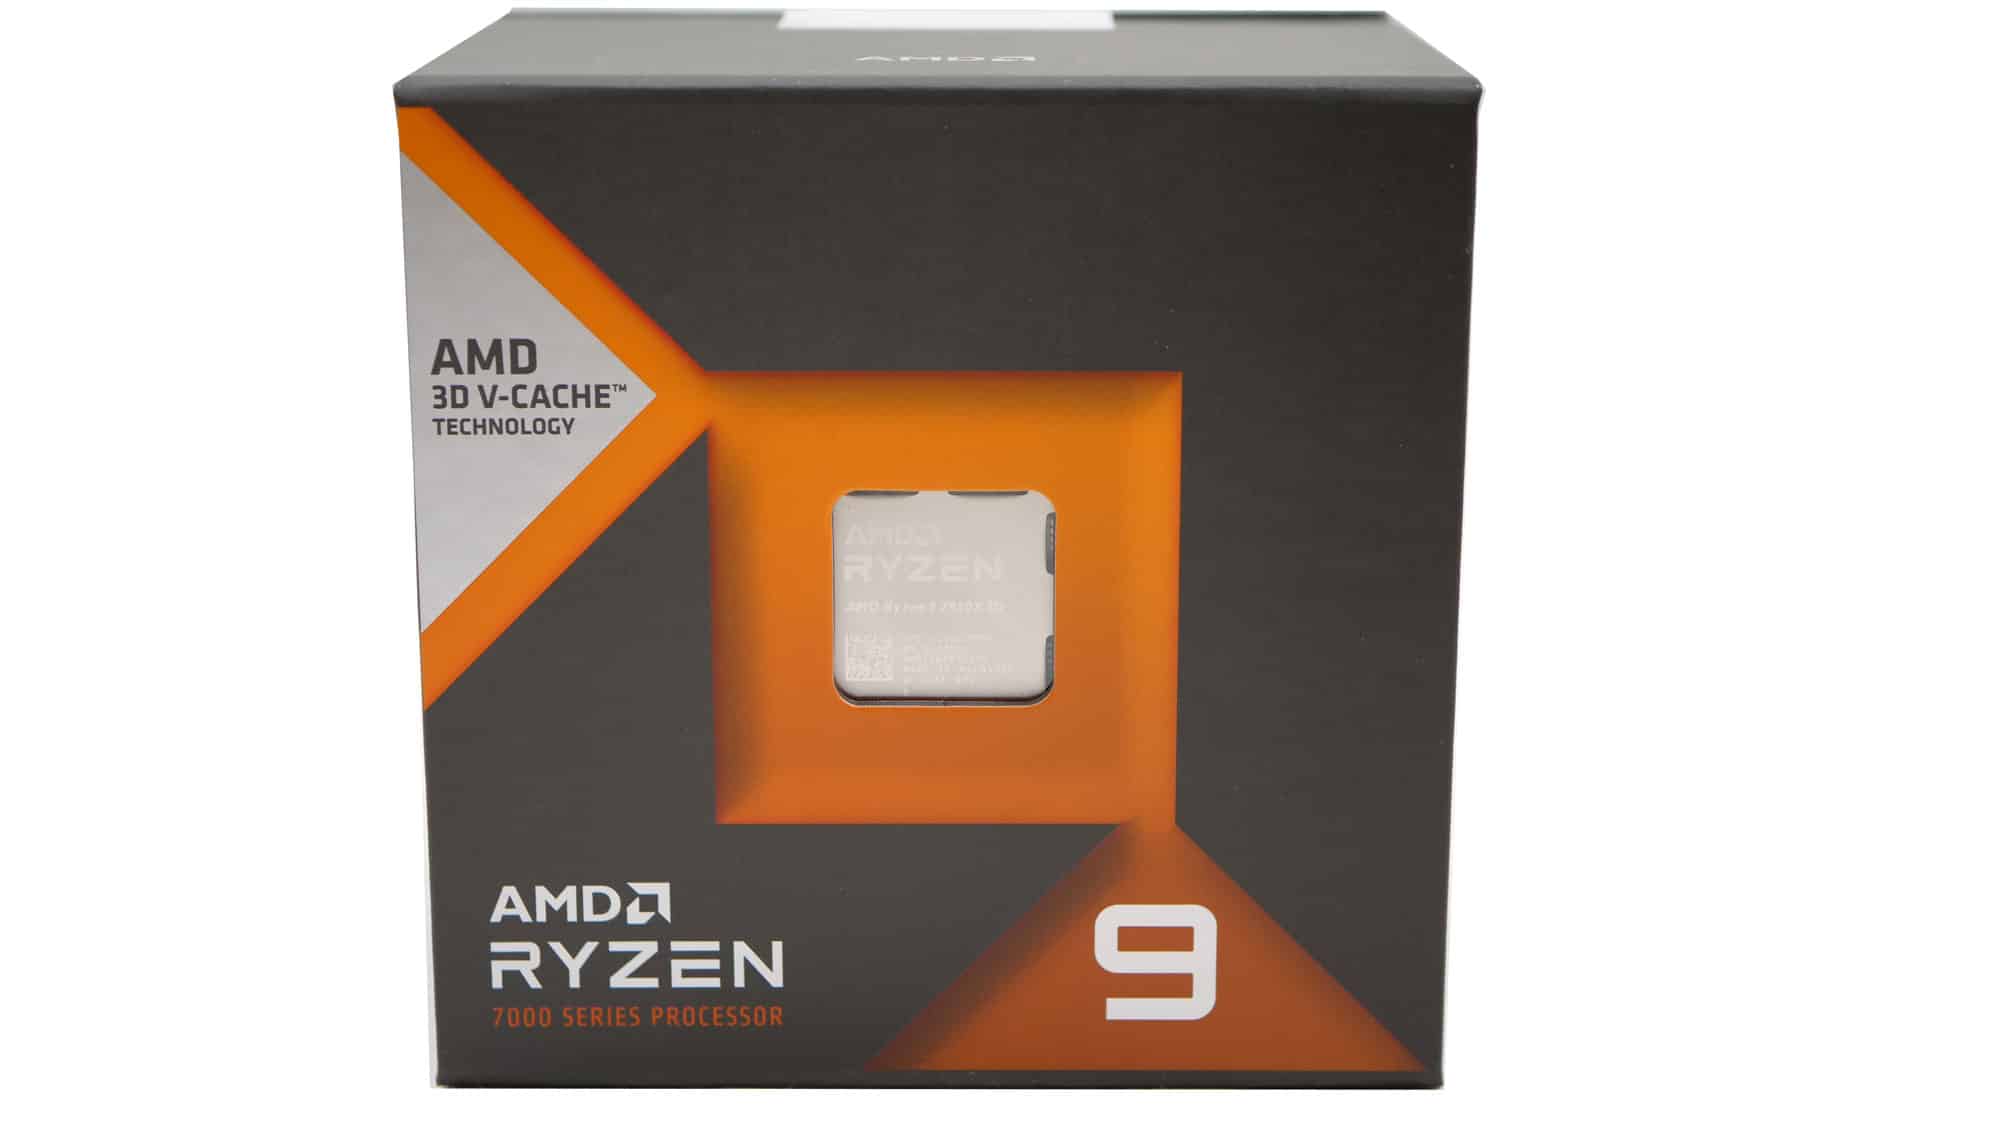 AMD Ryzen 9 7950X3D CPU Review: Performance, Thermals & Power Analysis -  Page 3 of 13 - Hardware Busters